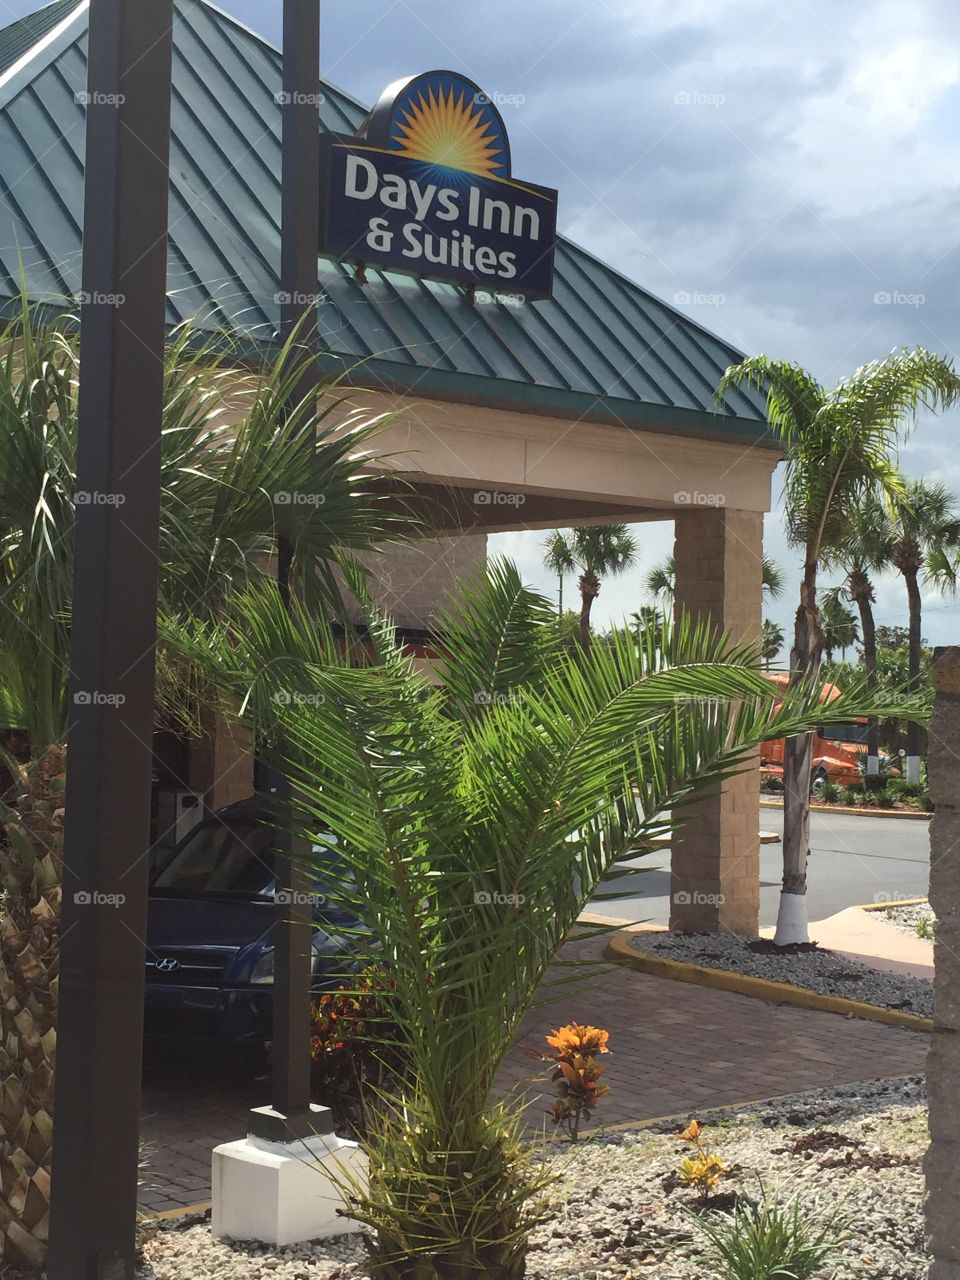 Days Inn - Davenport, Florida. The signage and front drive-up of Days Inn.